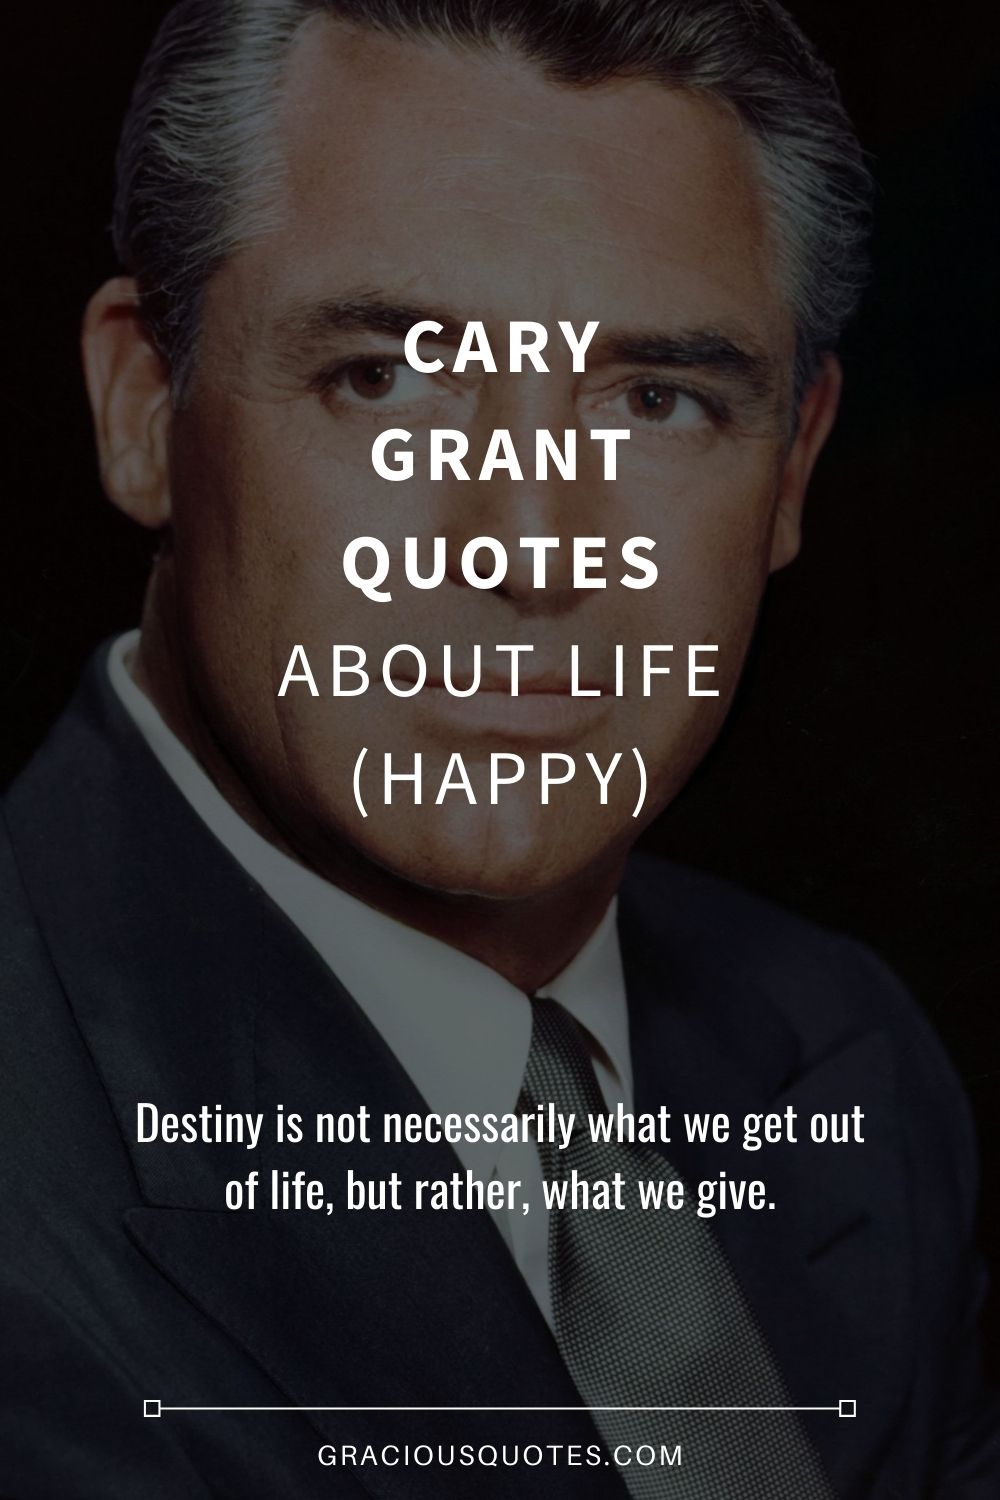 Cary Grant Quotes About Life (HAPPY) - Gracious Quotes